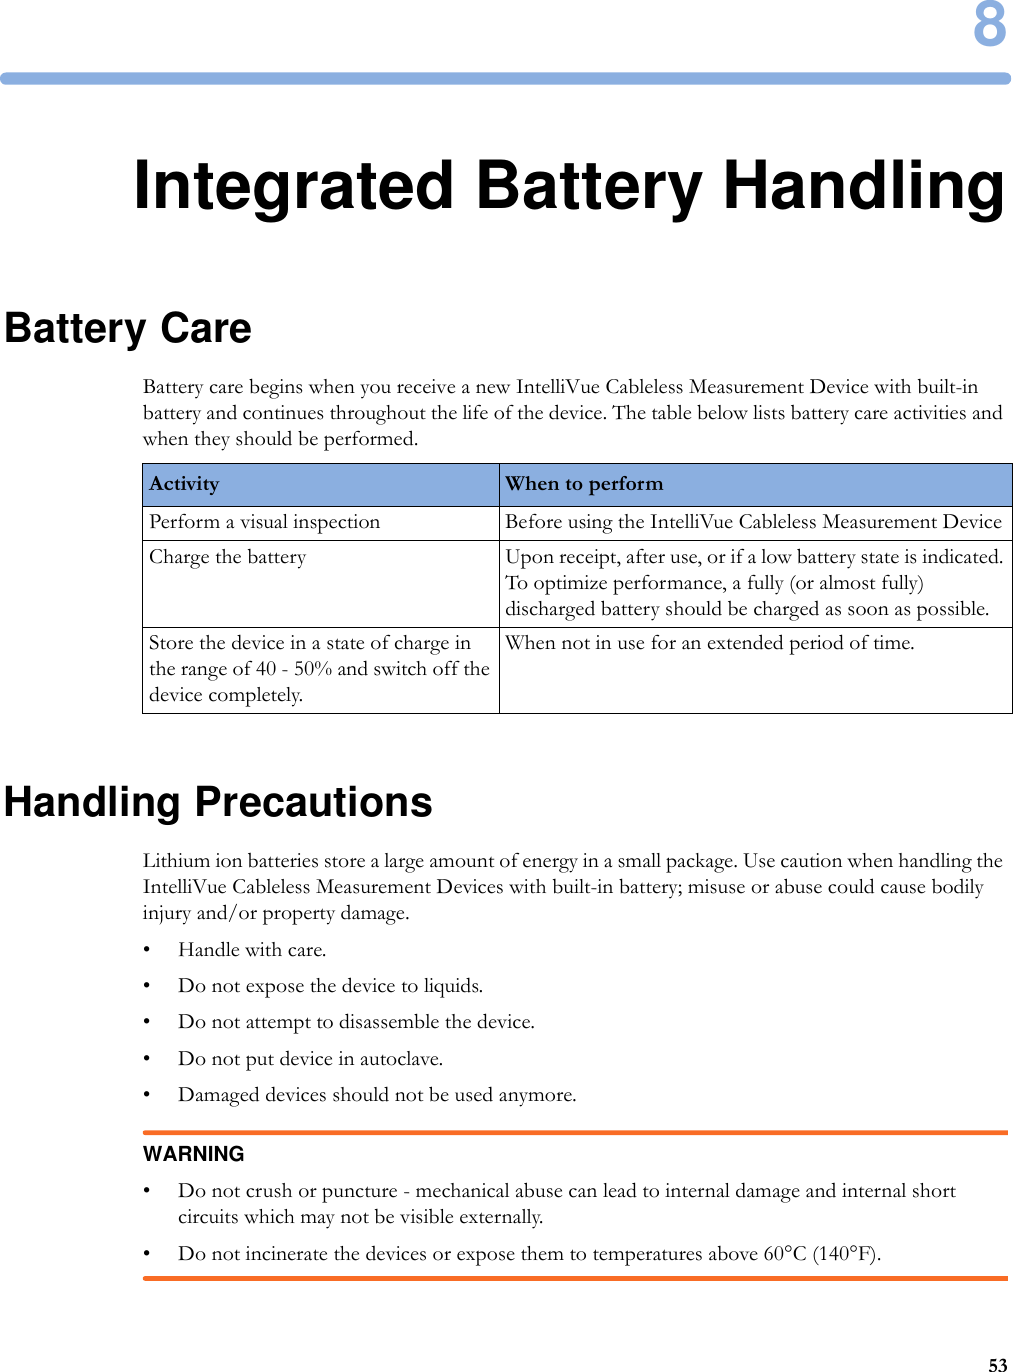 8538Integrated Battery HandlingBattery CareBattery care begins when you receive a new IntelliVue Cableless Measurement Device with built-in battery and continues throughout the life of the device. The table below lists battery care activities and when they should be performed.Handling PrecautionsLithium ion batteries store a large amount of energy in a small package. Use caution when handling the IntelliVue Cableless Measurement Devices with built-in battery; misuse or abuse could cause bodily injury and/or property damage.•Handle with care.• Do not expose the device to liquids.• Do not attempt to disassemble the device.• Do not put device in autoclave.• Damaged devices should not be used anymore.WARNING• Do not crush or puncture - mechanical abuse can lead to internal damage and internal short circuits which may not be visible externally.• Do not incinerate the devices or expose them to temperatures above 60°C (140°F).Activity When to performPerform a visual inspection Before using the IntelliVue Cableless Measurement DeviceCharge the battery Upon receipt, after use, or if a low battery state is indicated. To optimize performance, a fully (or almost fully) discharged battery should be charged as soon as possible.Store the device in a state of charge in the range of 40 - 50% and switch off the device completely.When not in use for an extended period of time. 